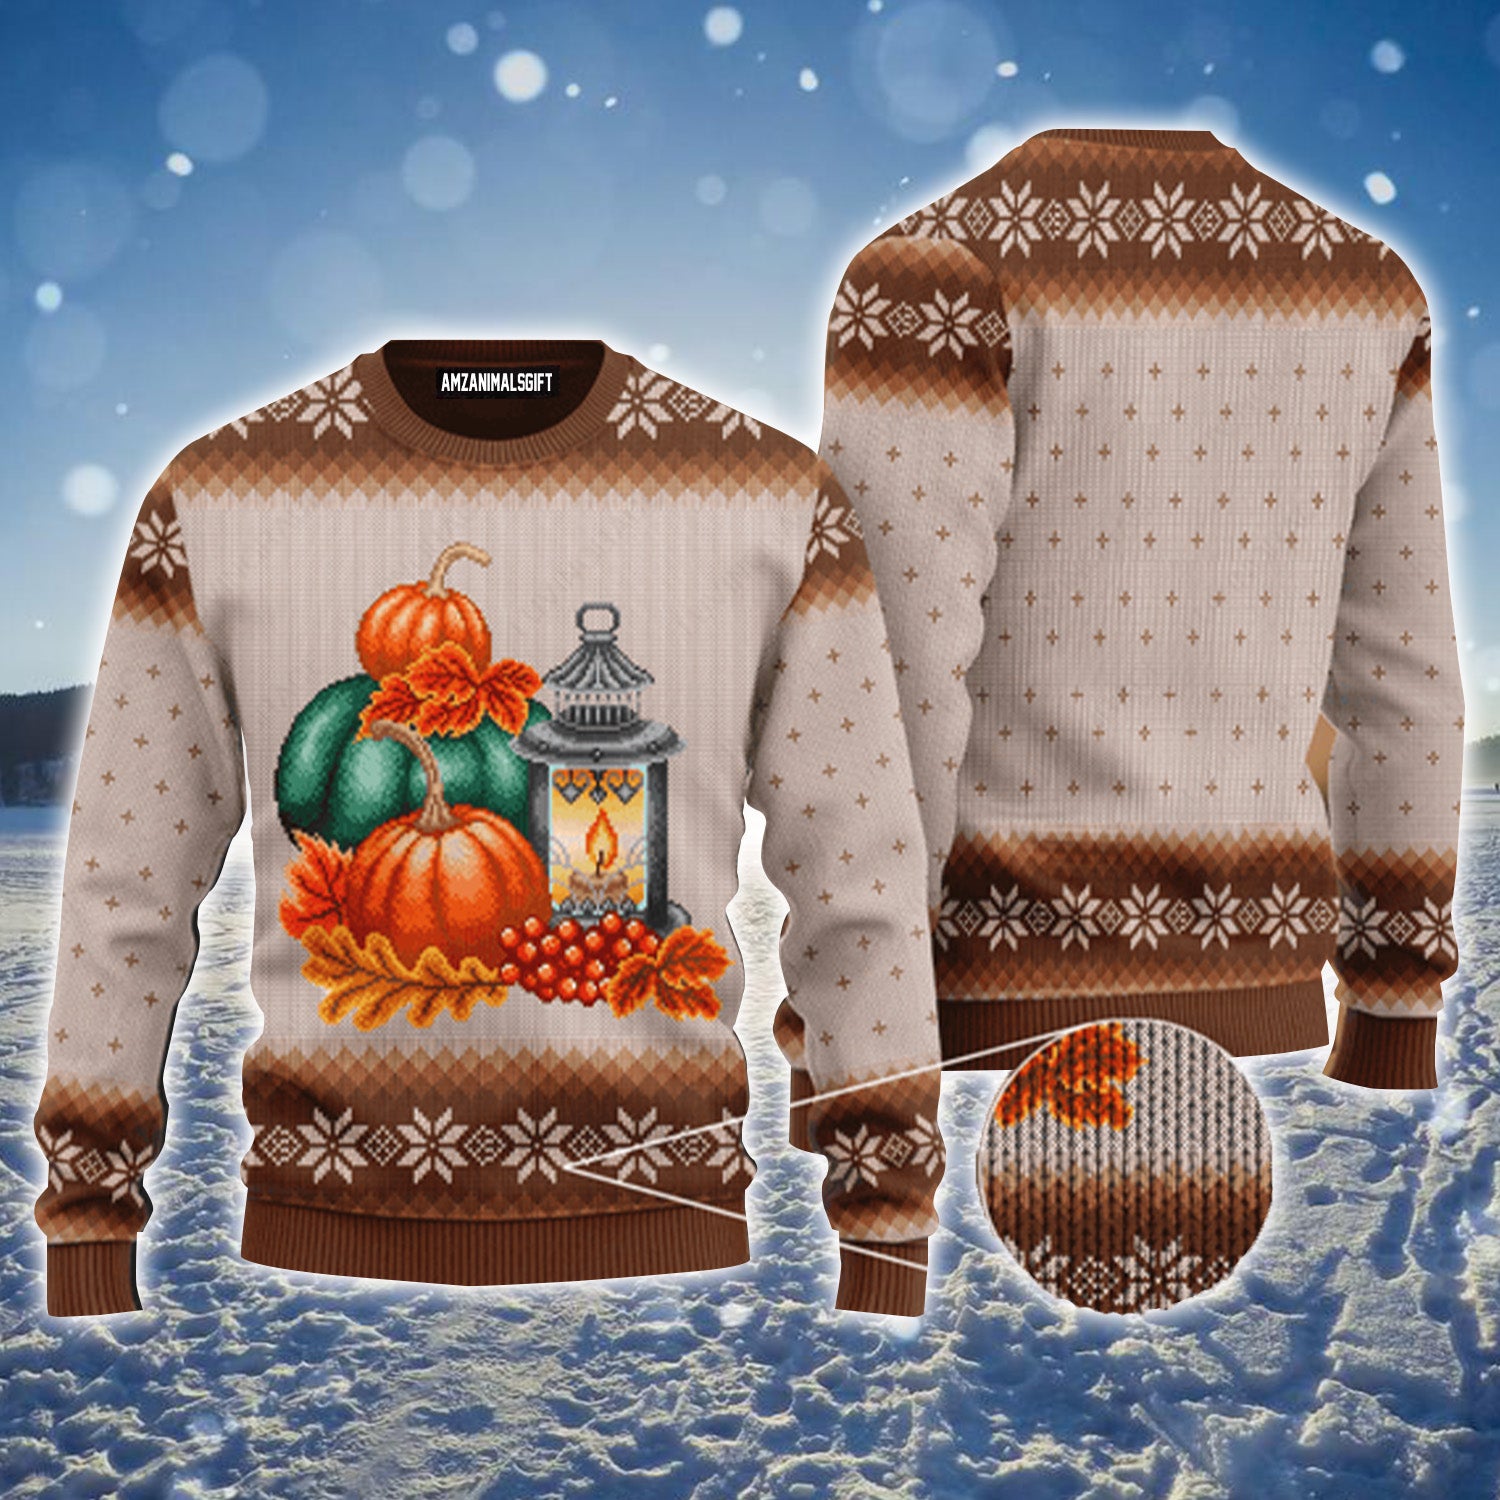 Vintage Thanksgiving Floral Pumpkin Urly Sweater, Thanksgiving Sweater For Men & Women - Perfect Gift For Thanksgiving, New Year, Winter, Christmas